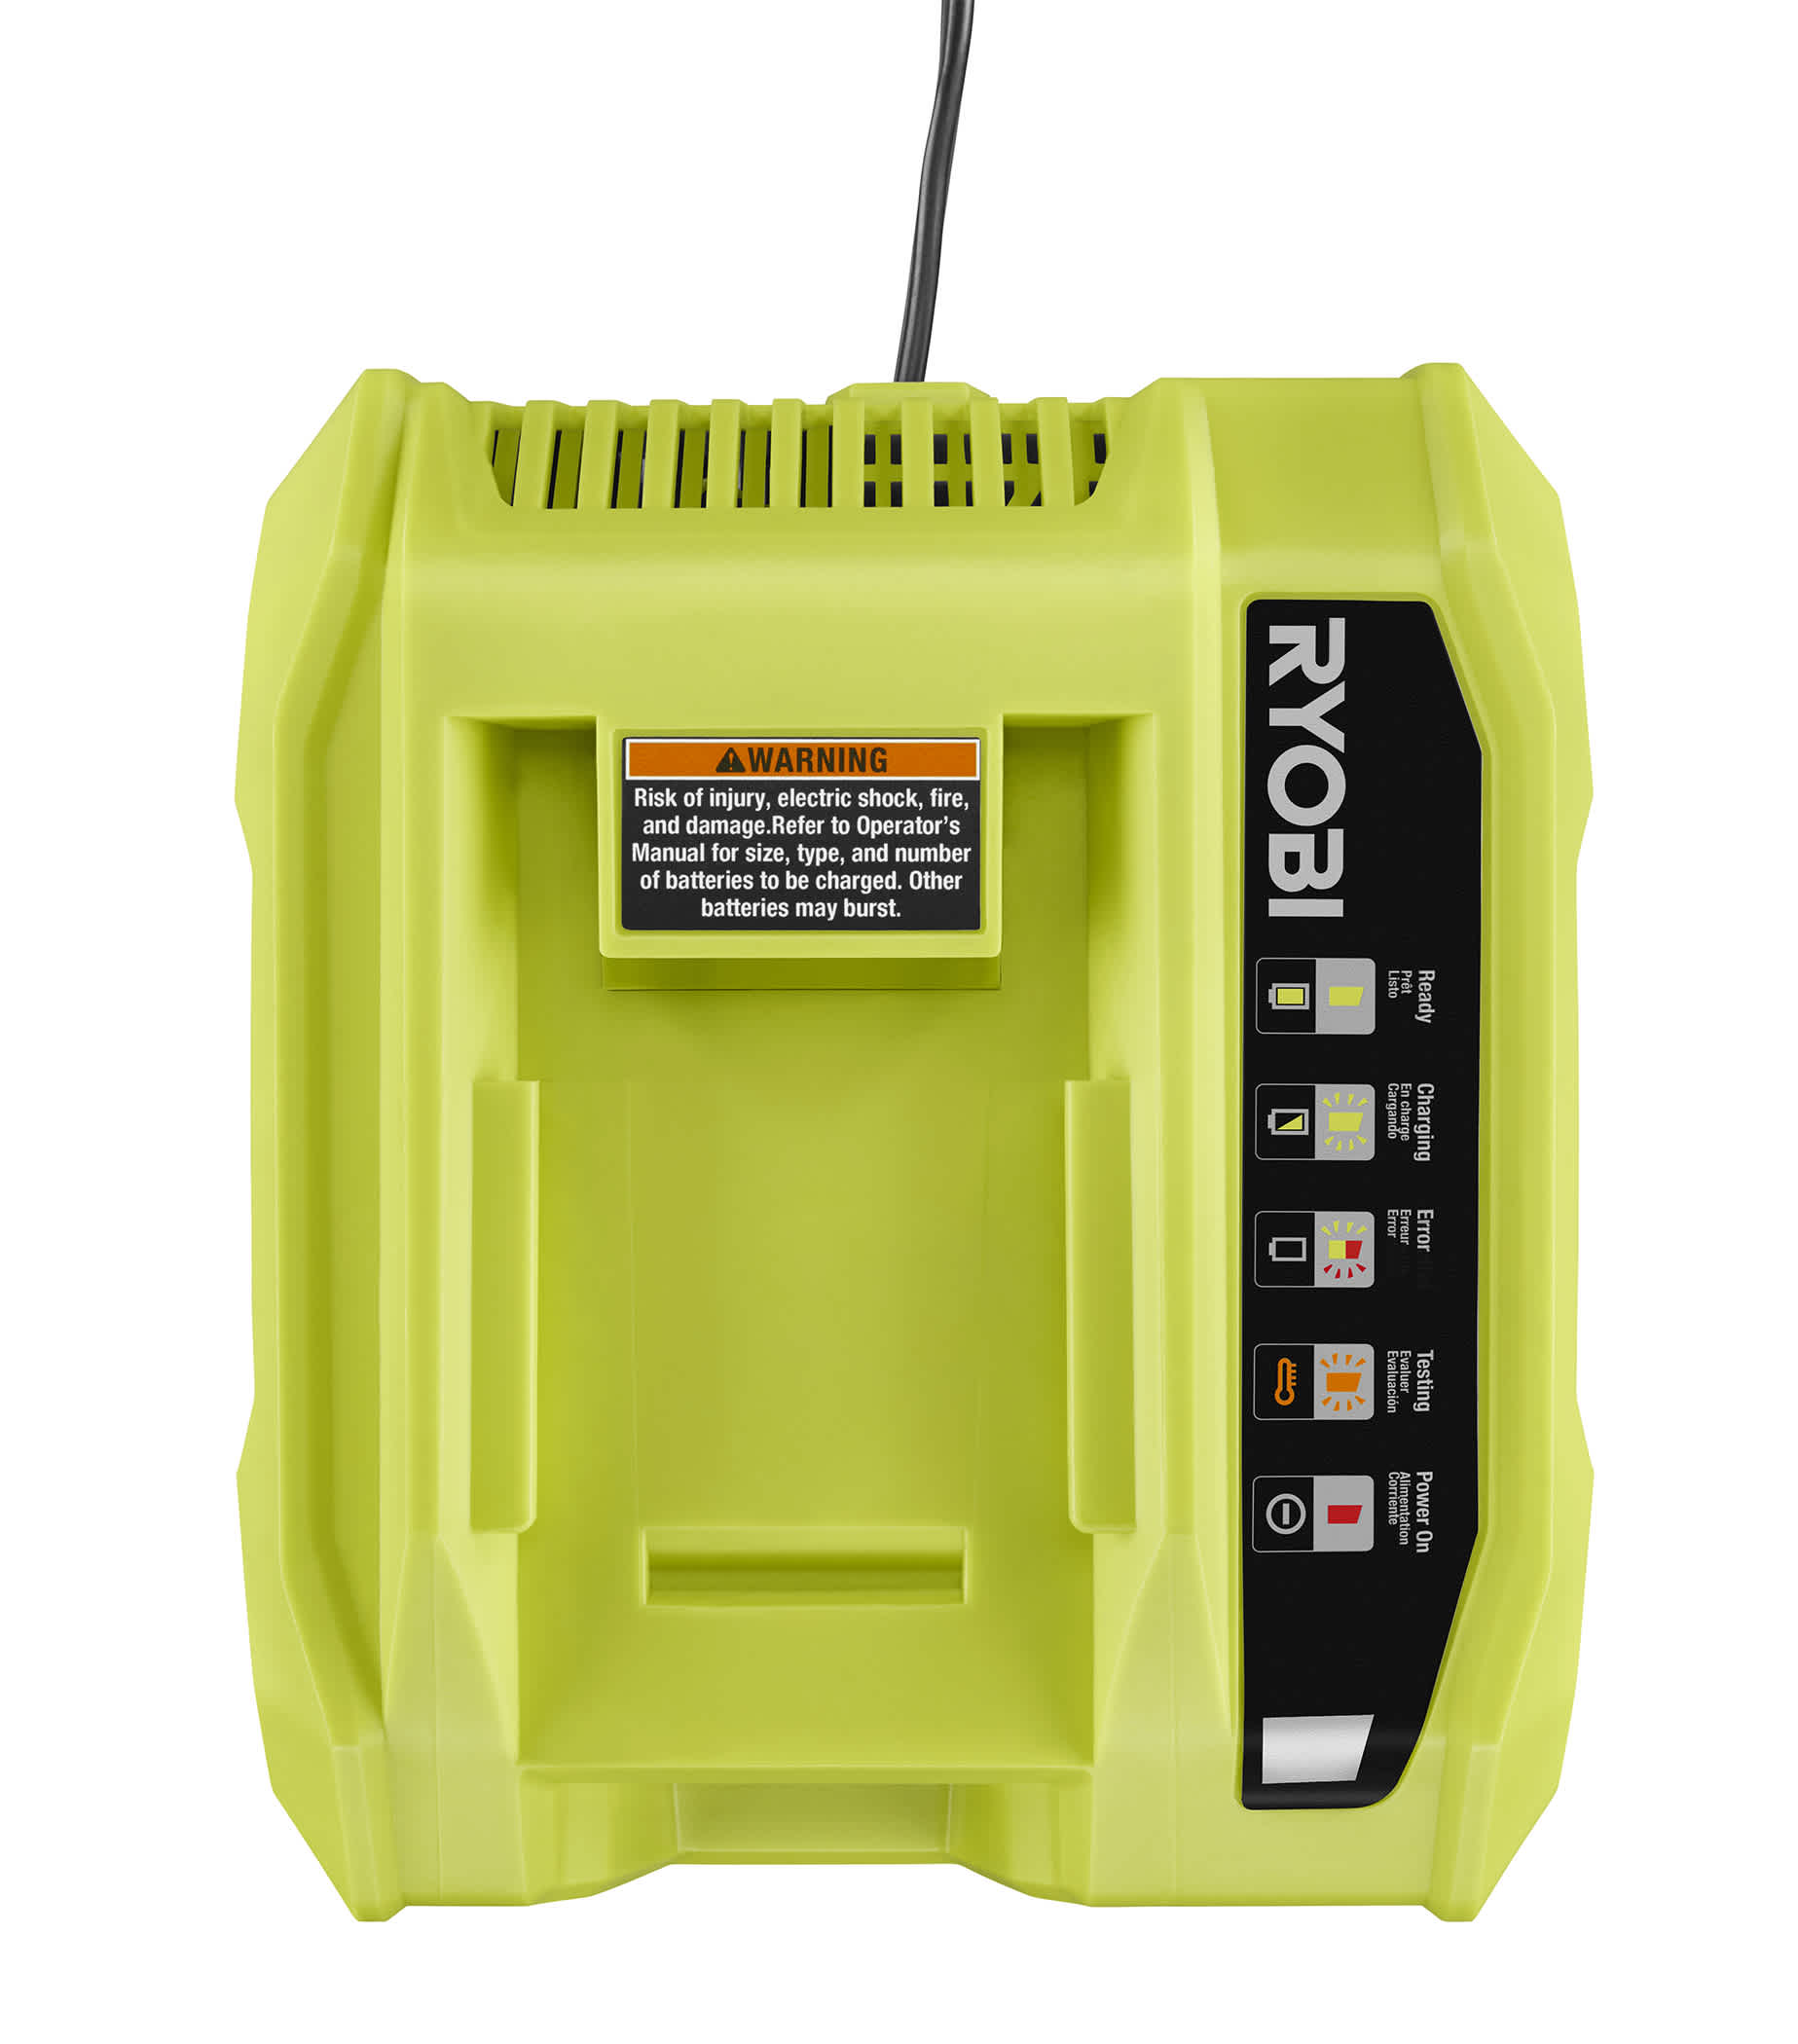 Product Features Image for 40V LITHIUM-ION HIGH CAPACITY 7.5AH BATTERY AND RAPID CHARGER KIT.